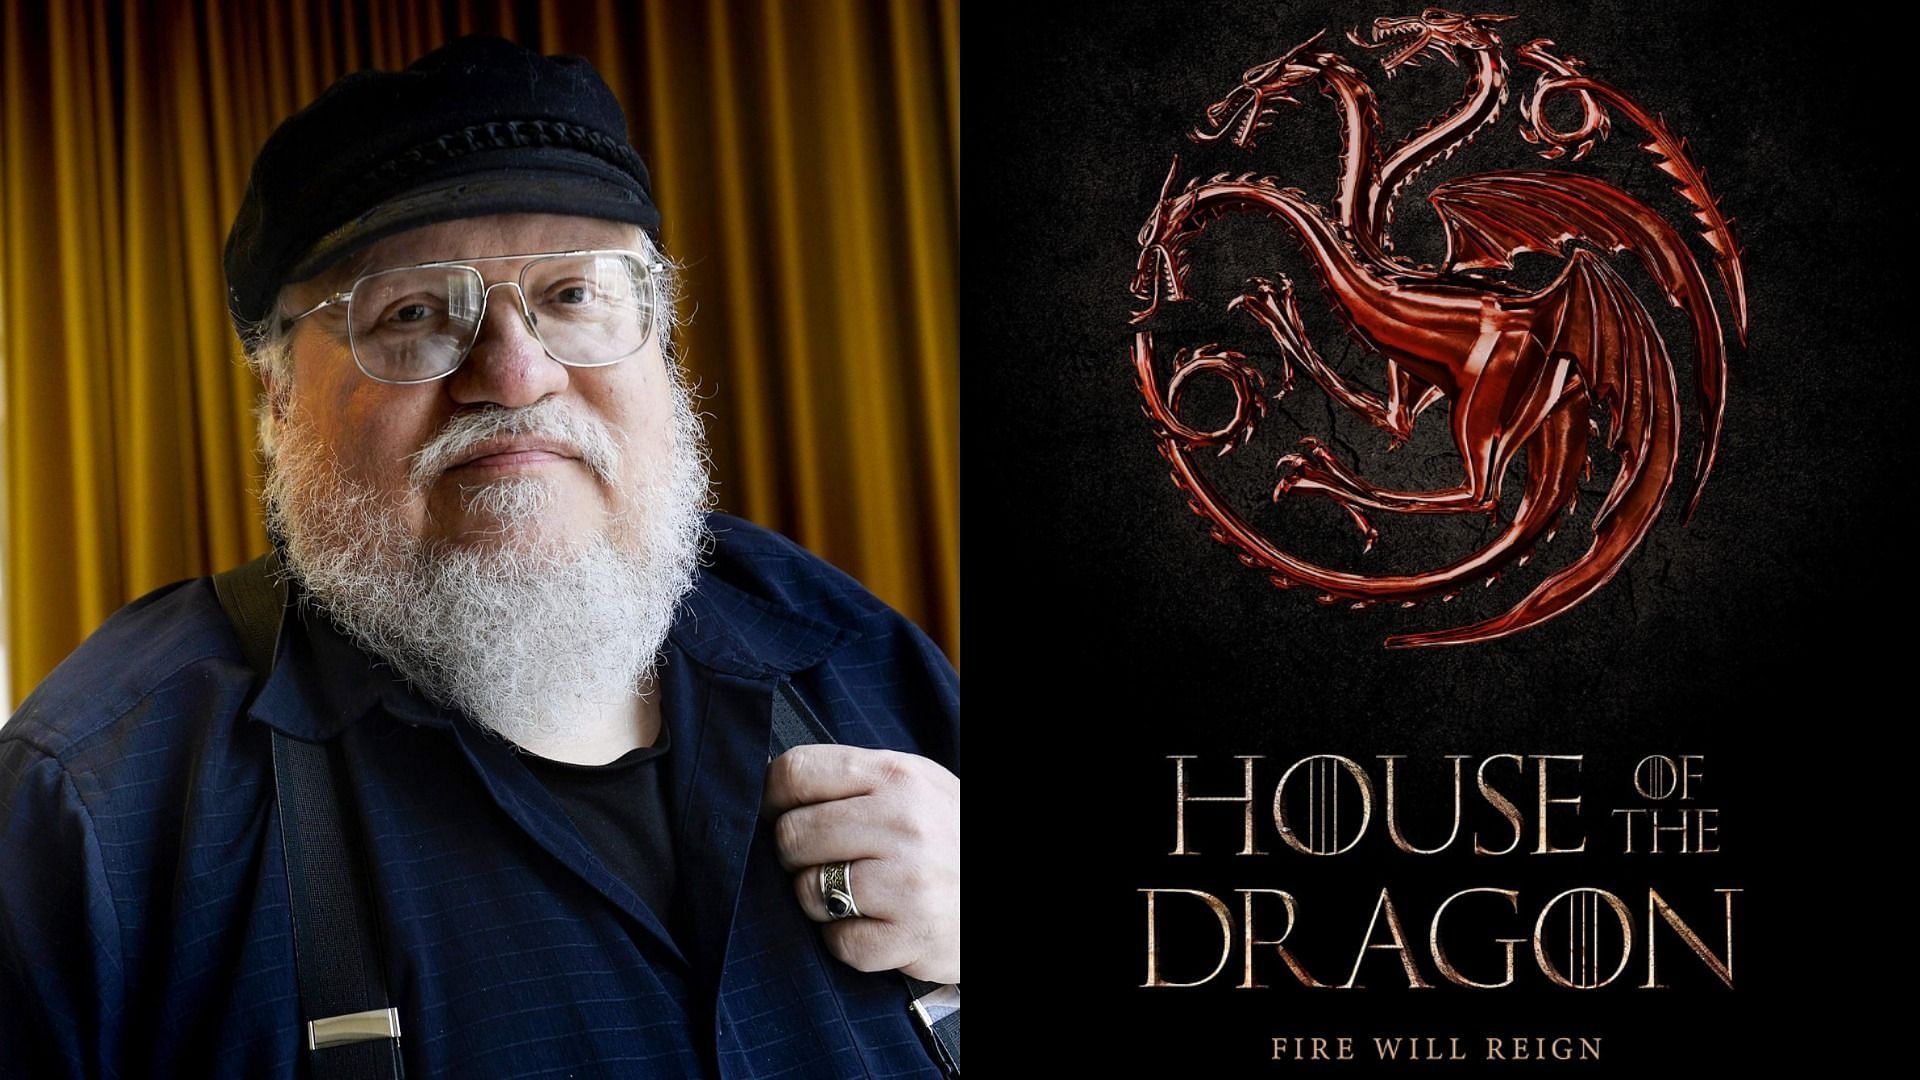 George R. R. Martin praised House of the Dragon (Images via Shutterstock and HBO)